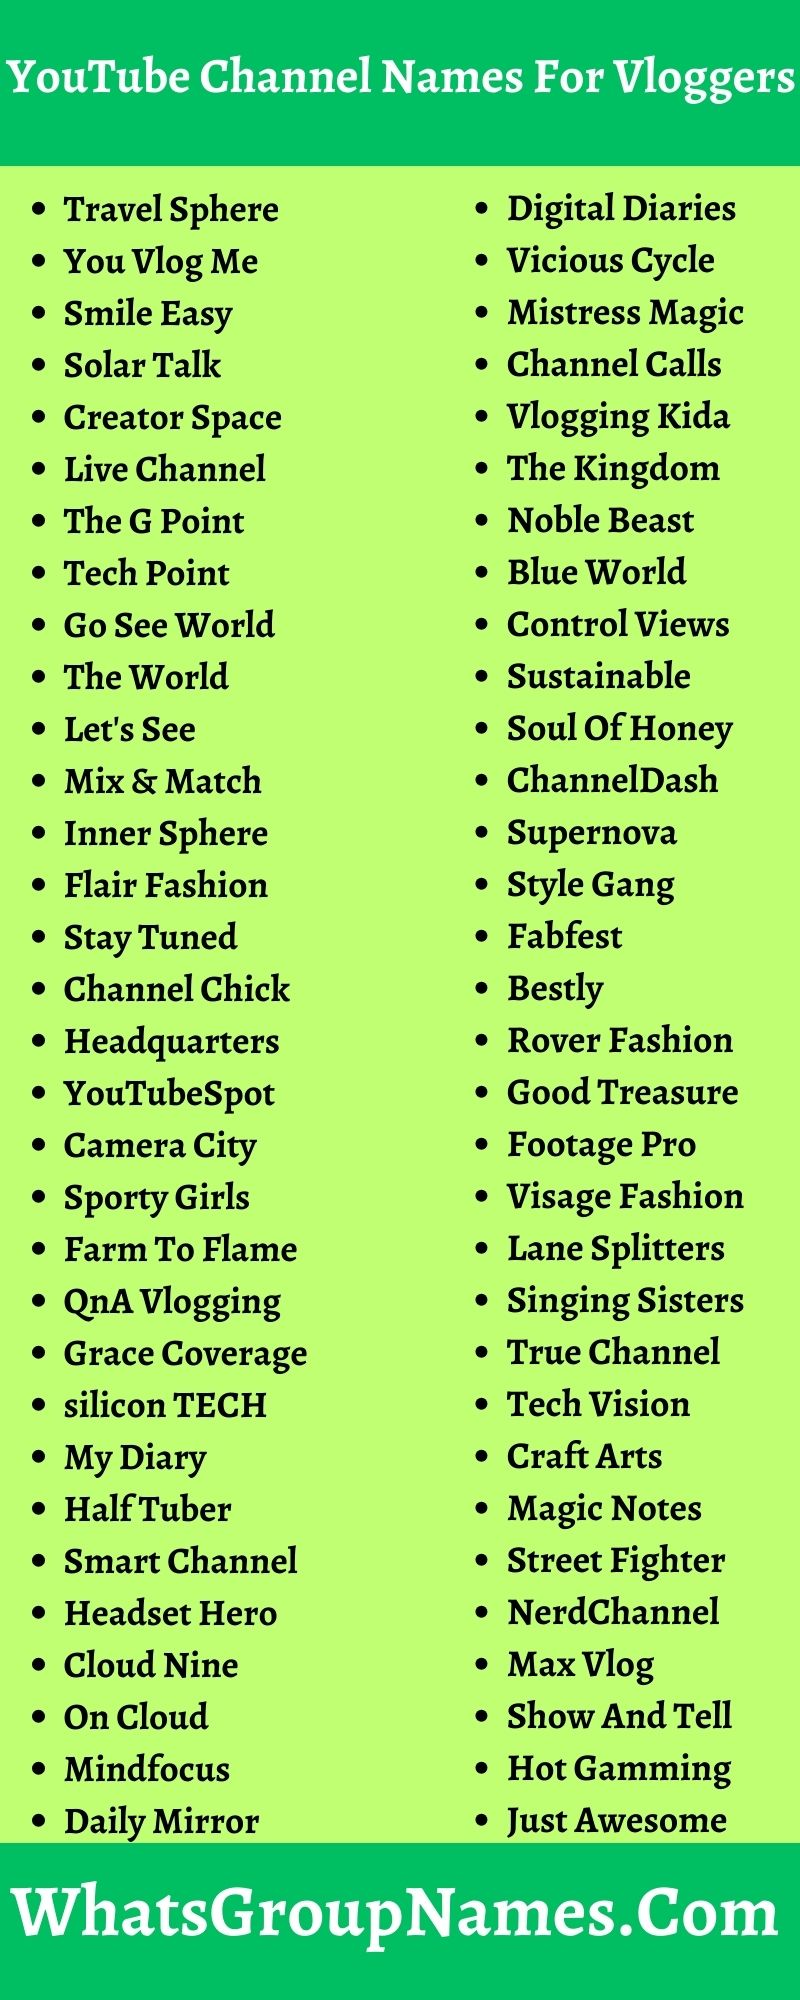 YouTube Channel Names For Vloggers